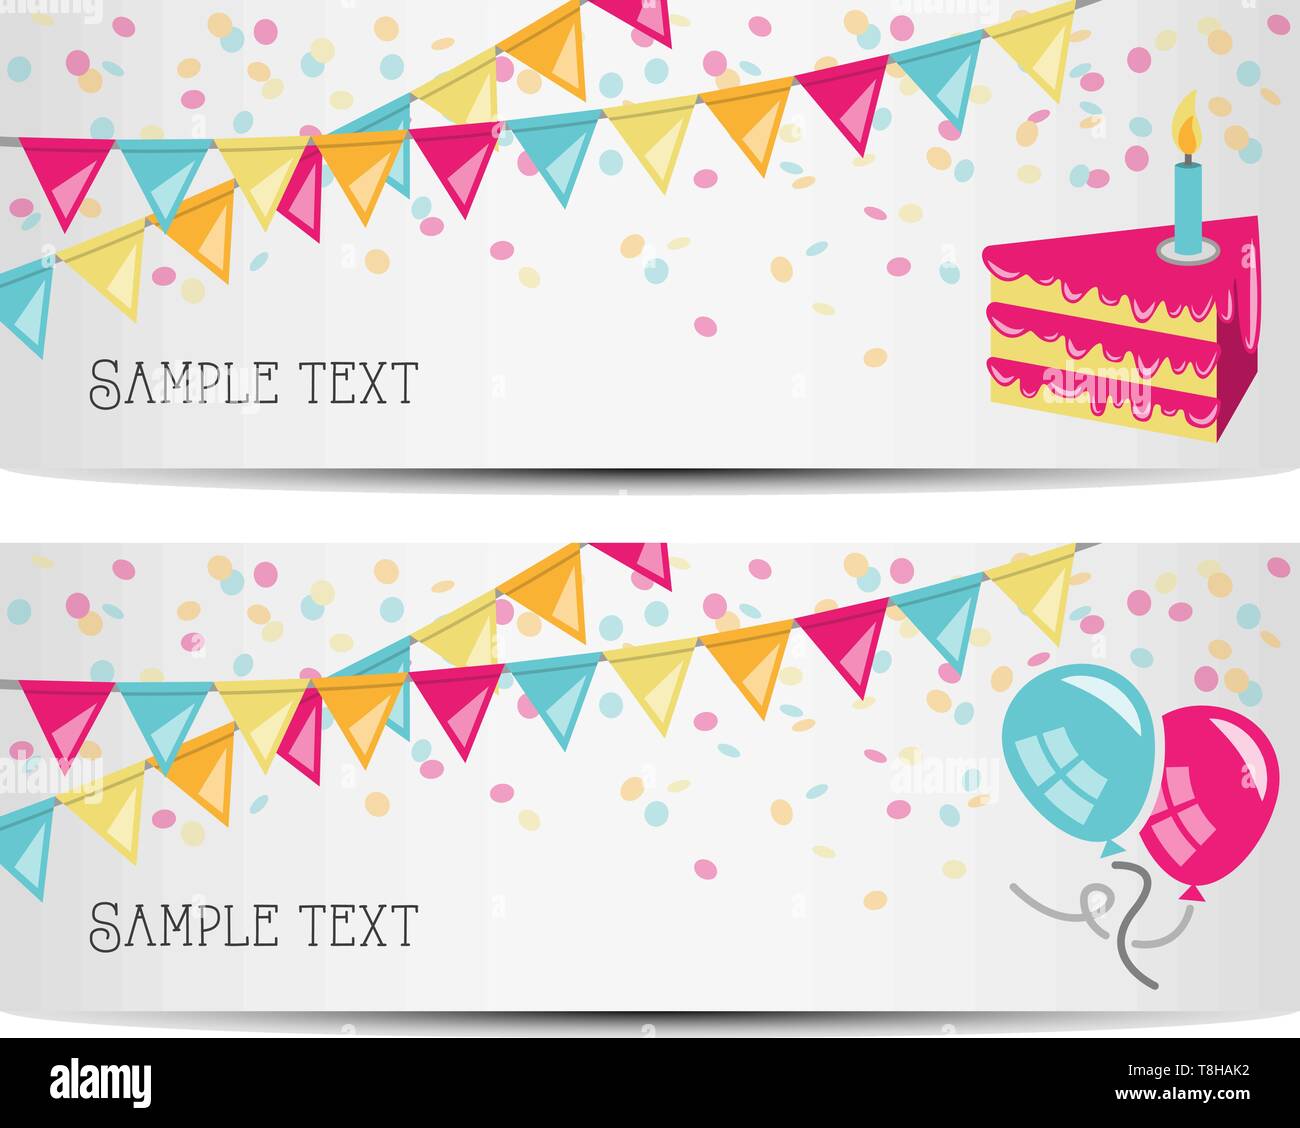 party banners vector Stock Vector